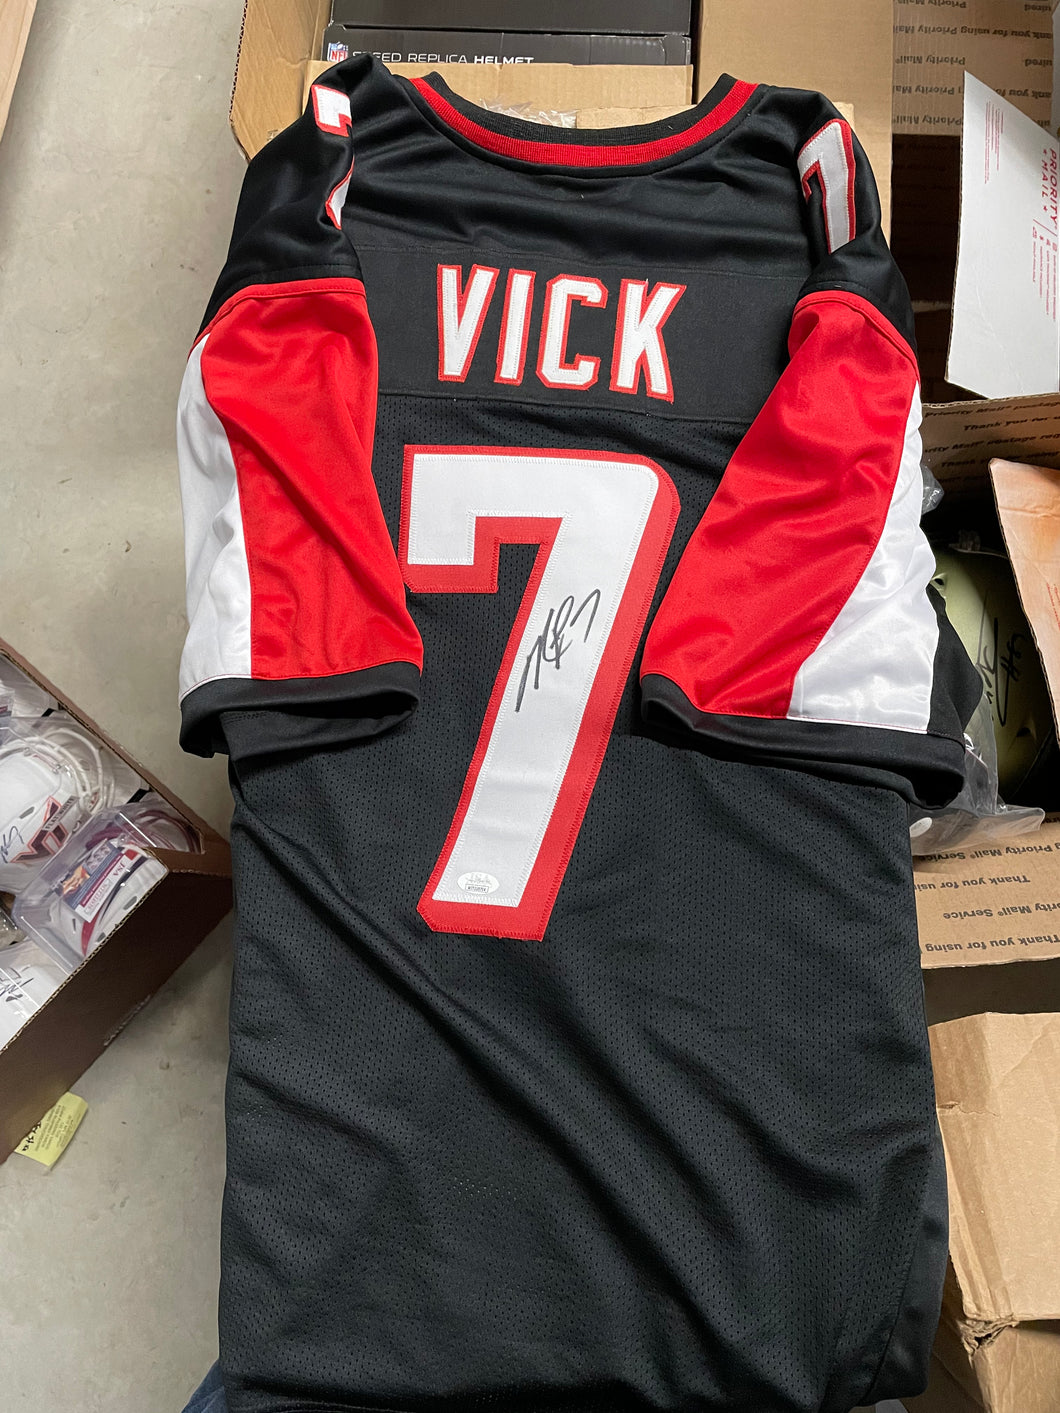 MIKE VICK FALCONS JERSEY is